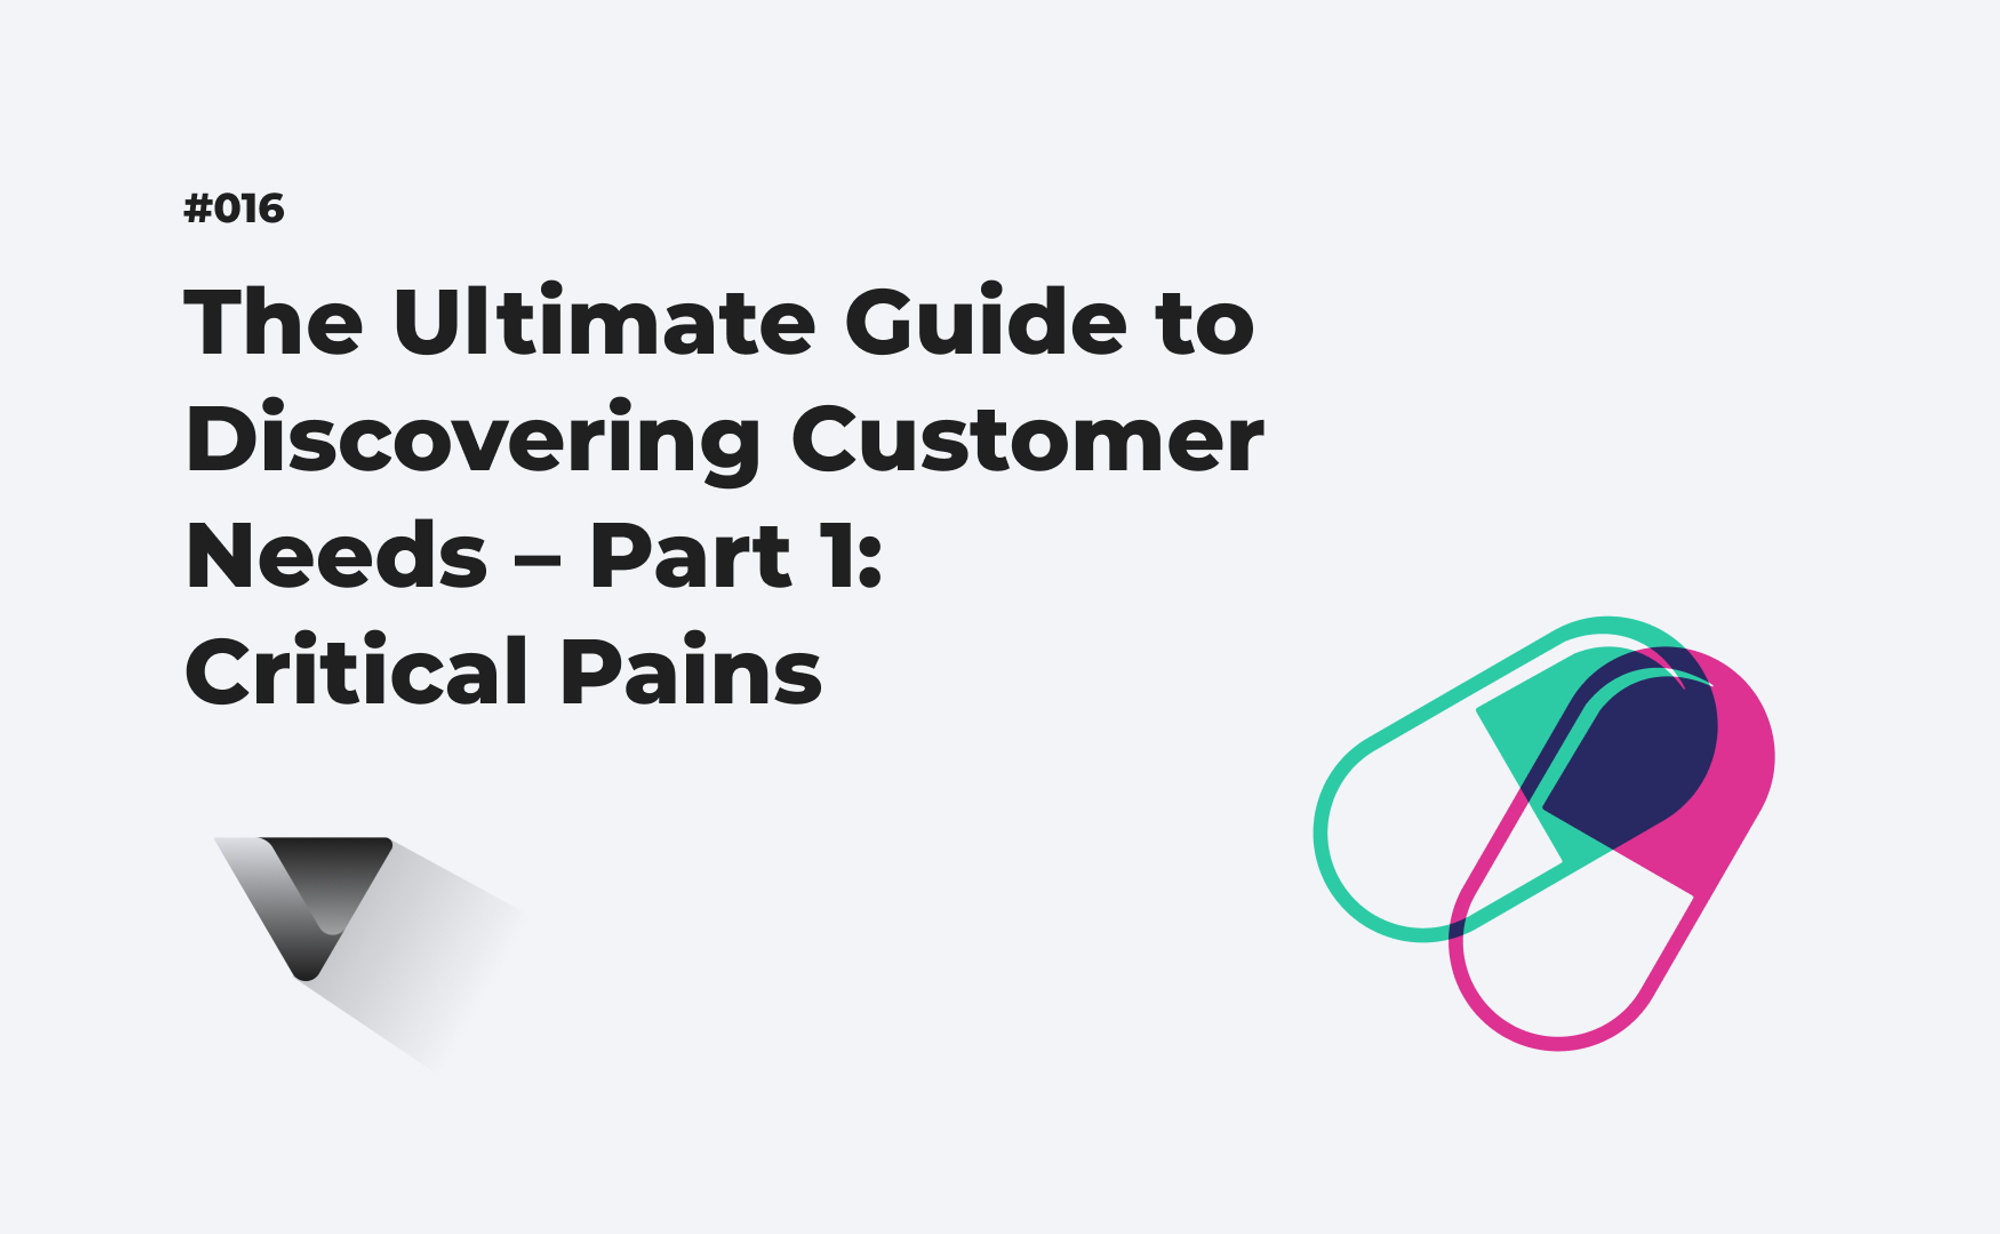 The Ultimate Guide to Discovering Customer Needs – Part 1: Critical Pains